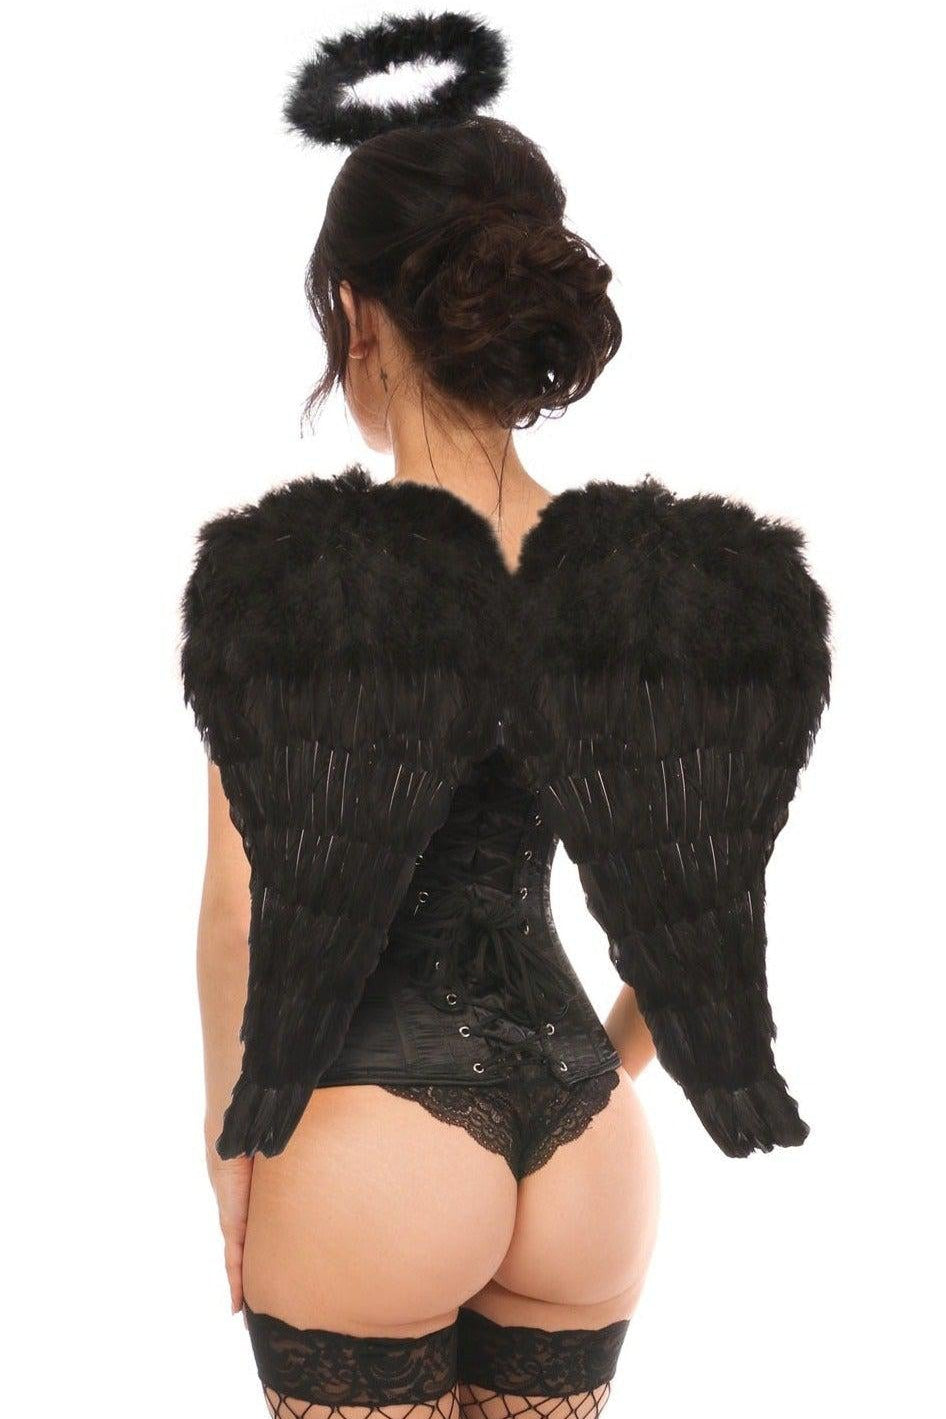 3 Piece Sexy Midnight Angel Corset Costume-Angel Costumes-Daisy Corsets-SEXYSHOES.COM